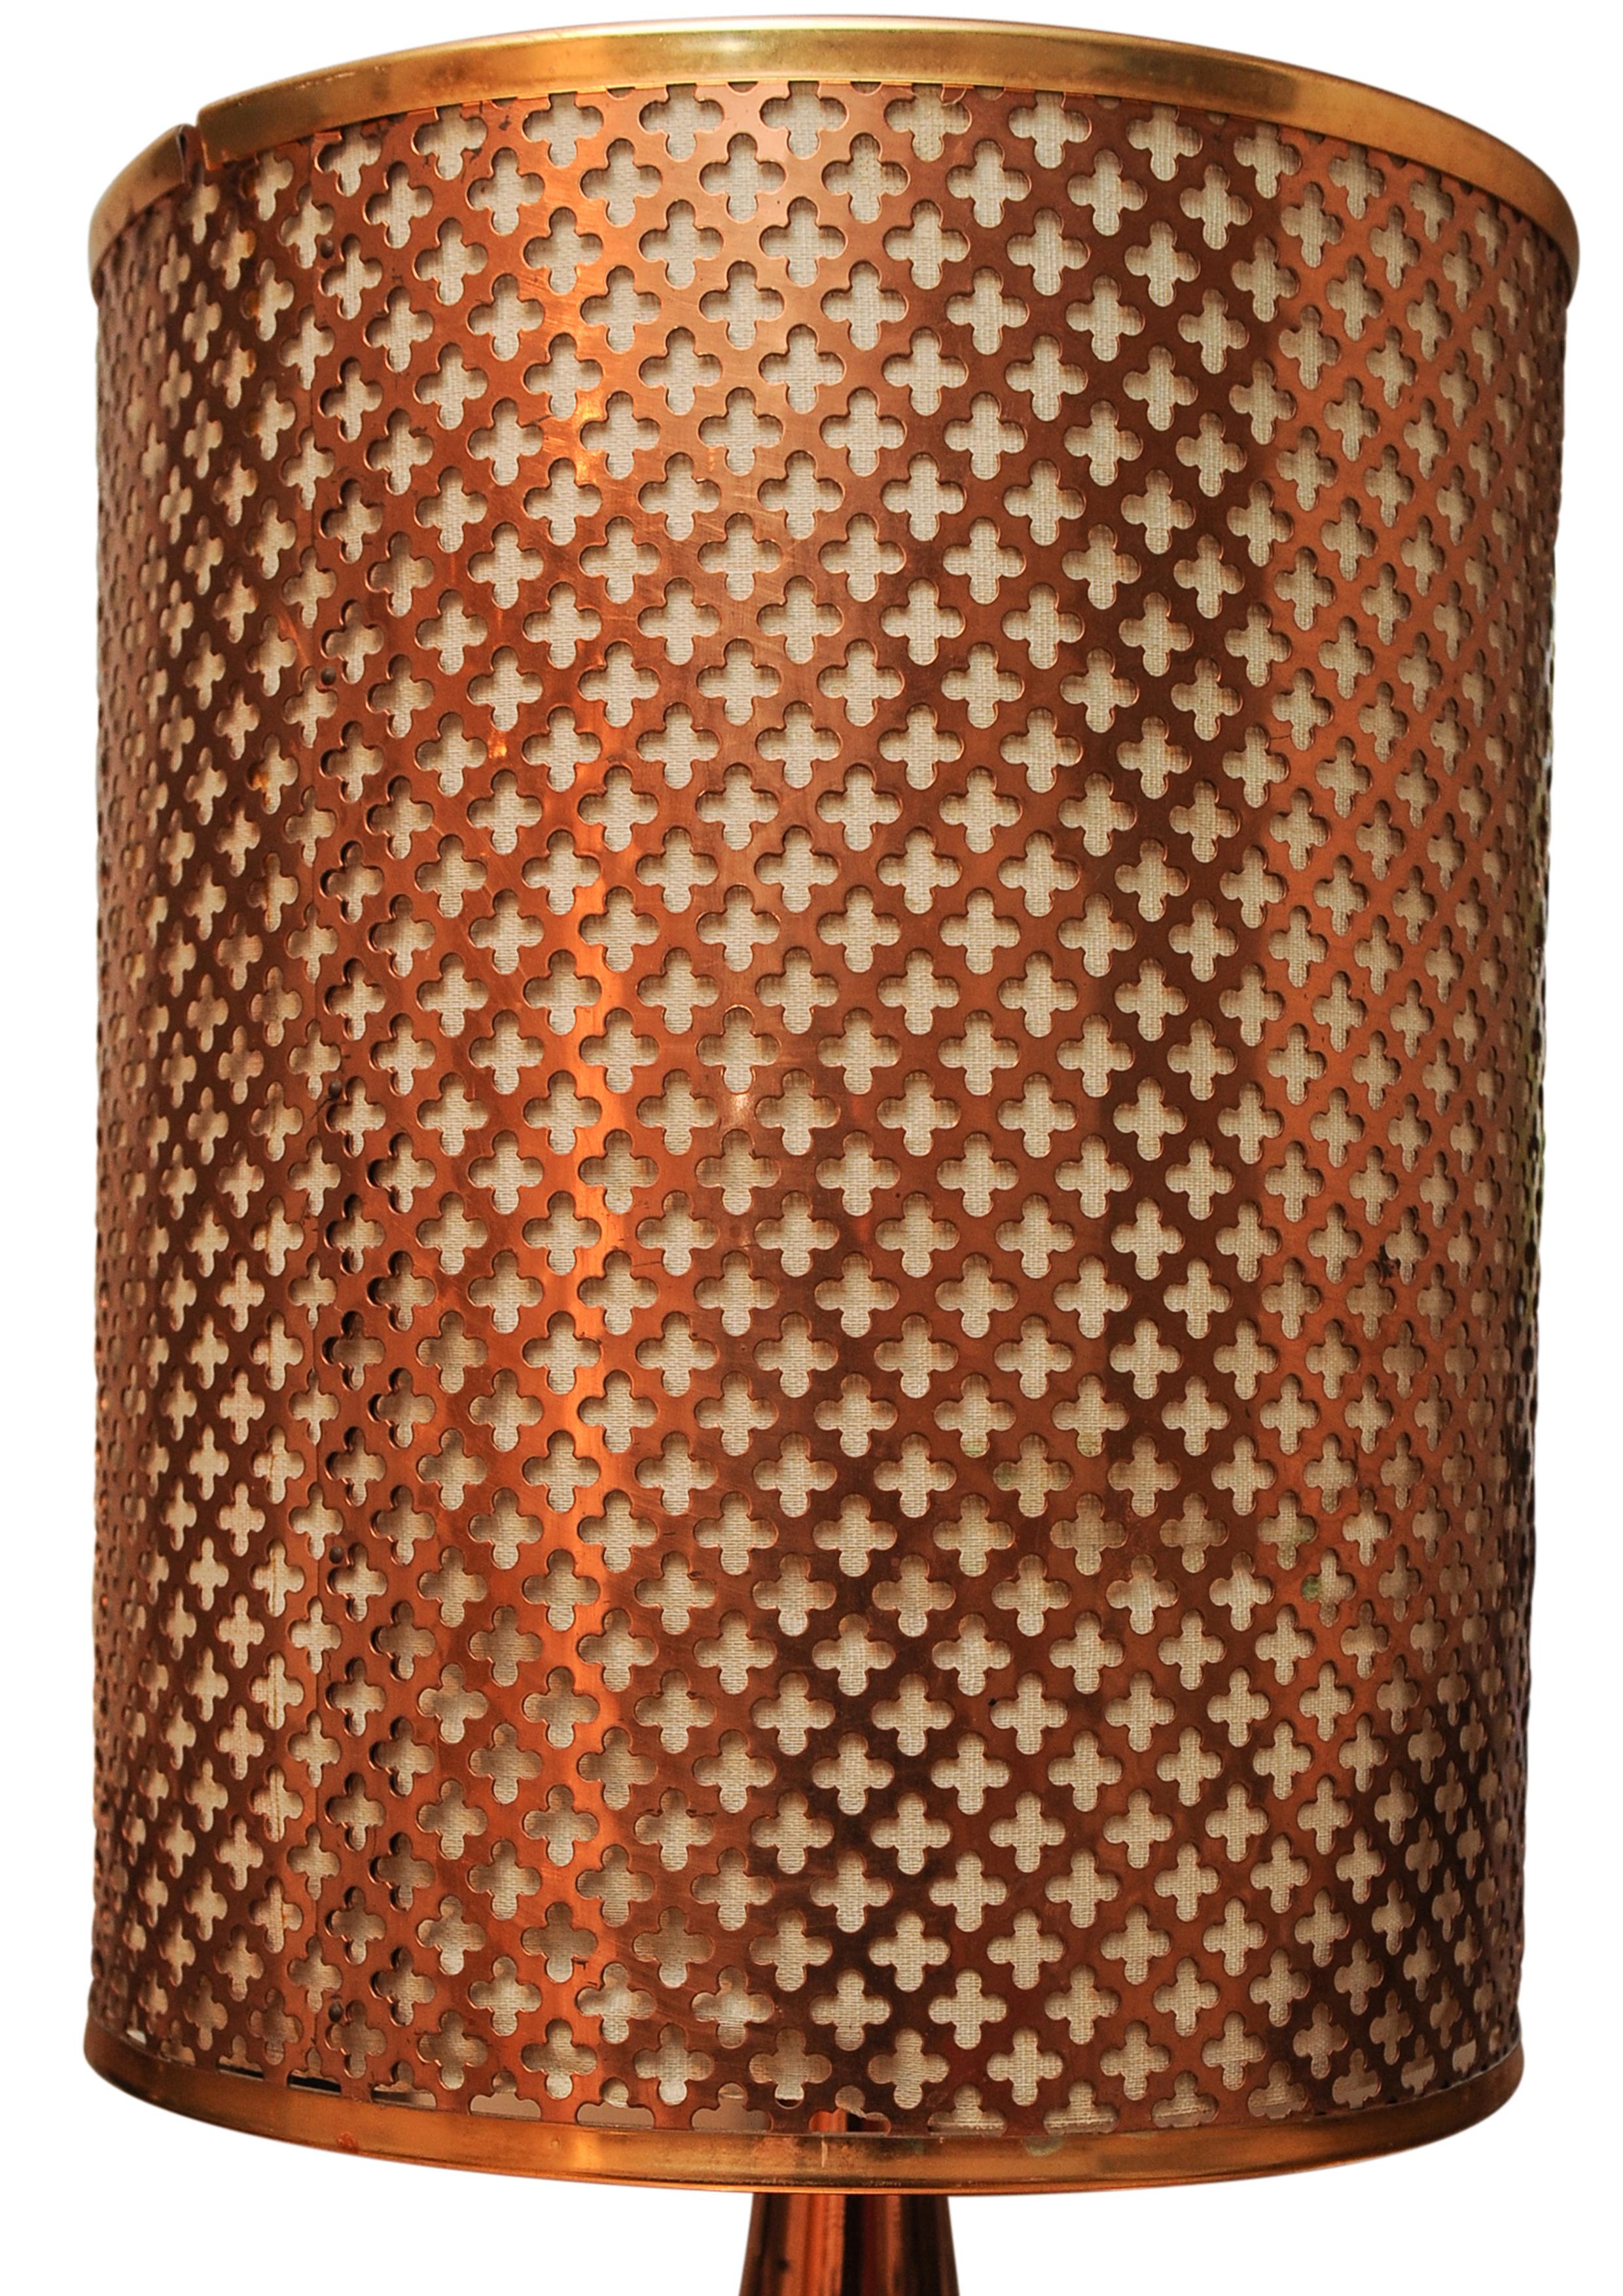 Moorish A Zambian Copper Table Lamp With A Repeating Lattice Work Pattern For Sale